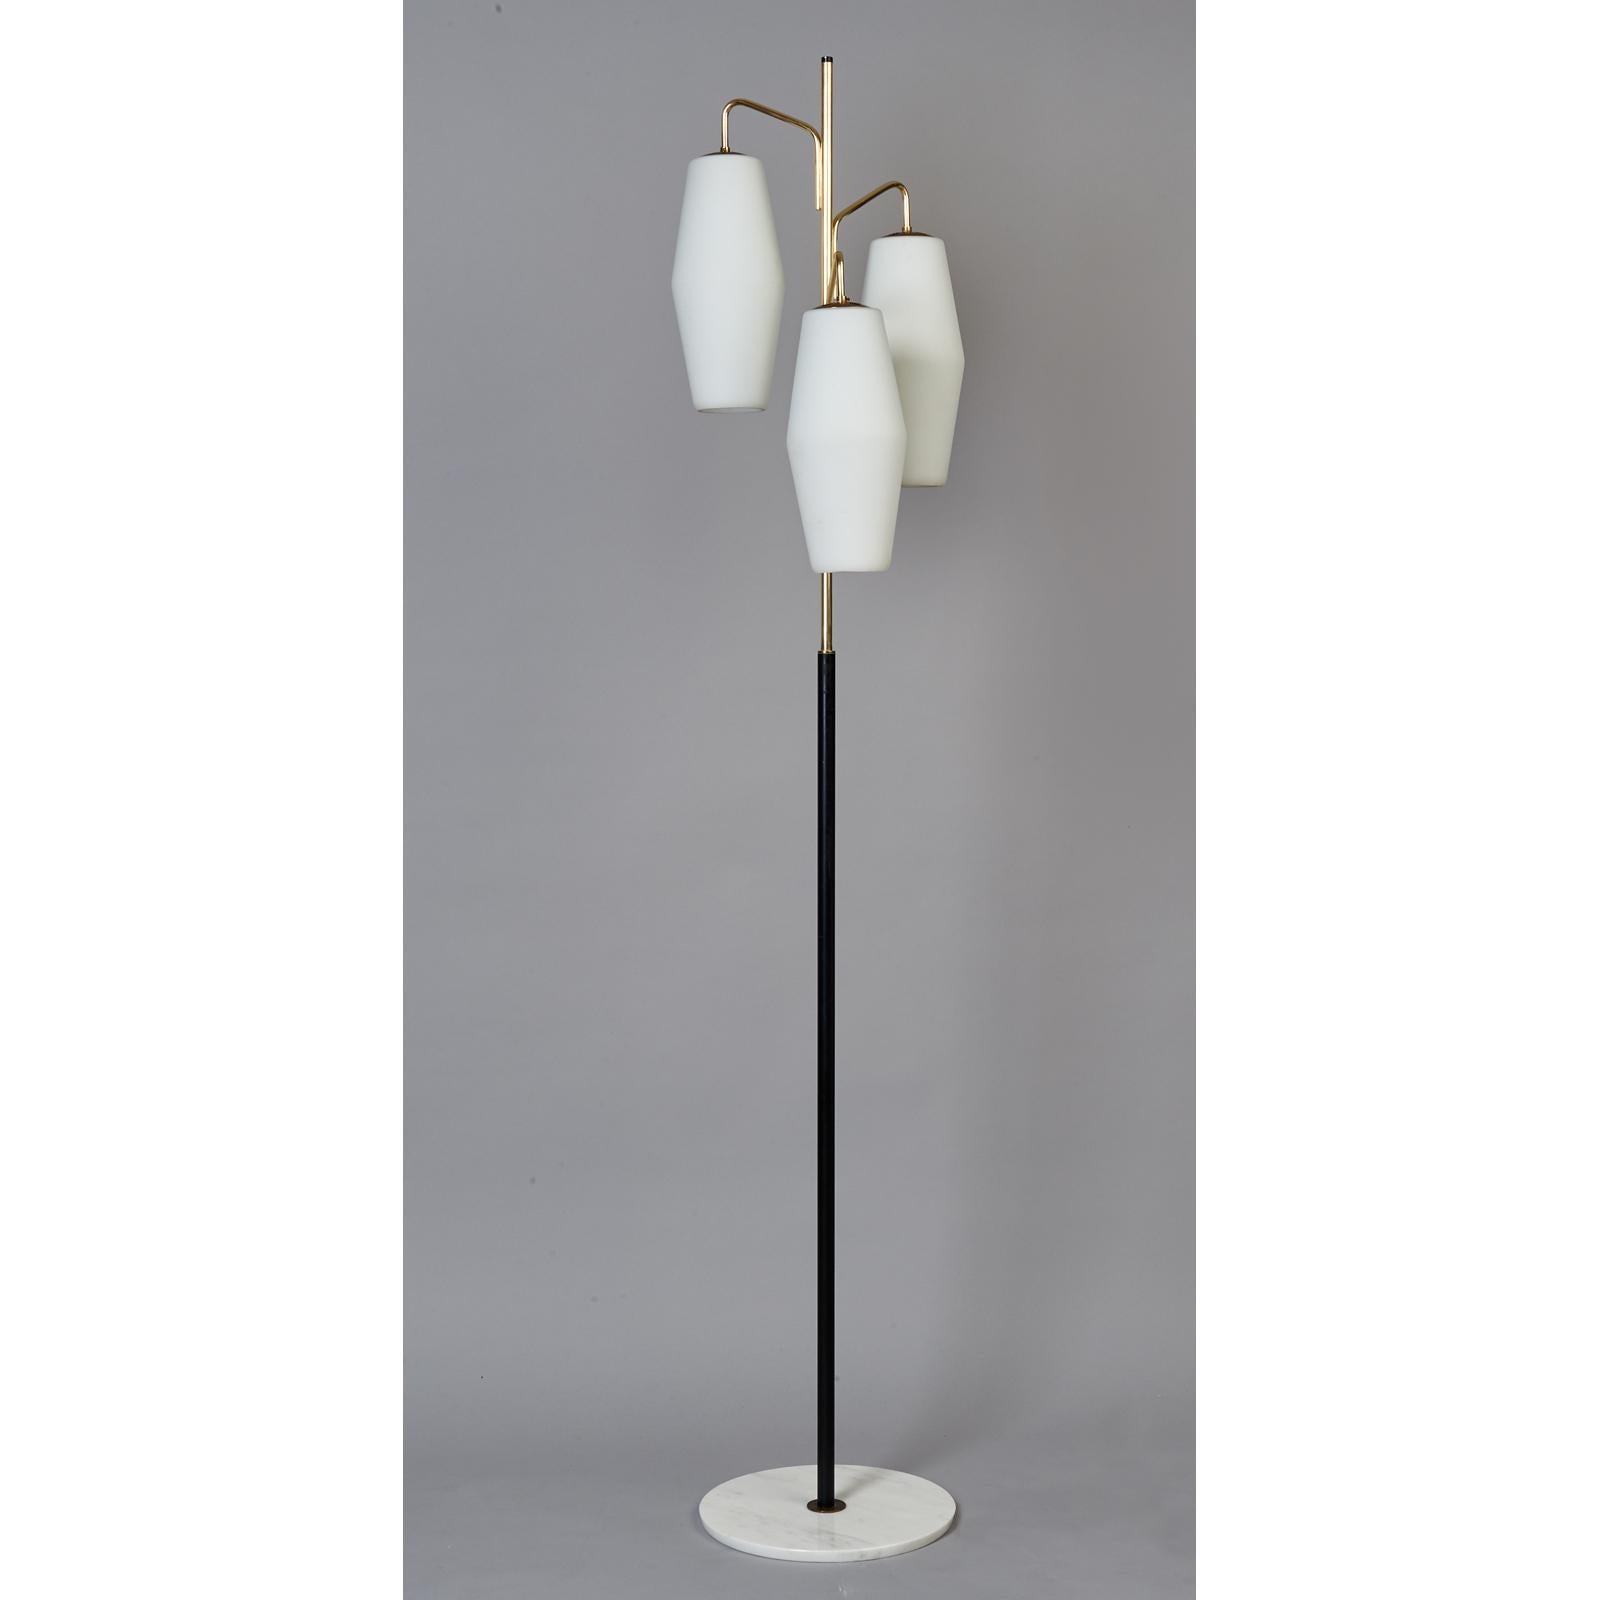 Mid-20th Century Stilnovo Monumental Floor Lamp in Marble and White Glass, Italy 1950's